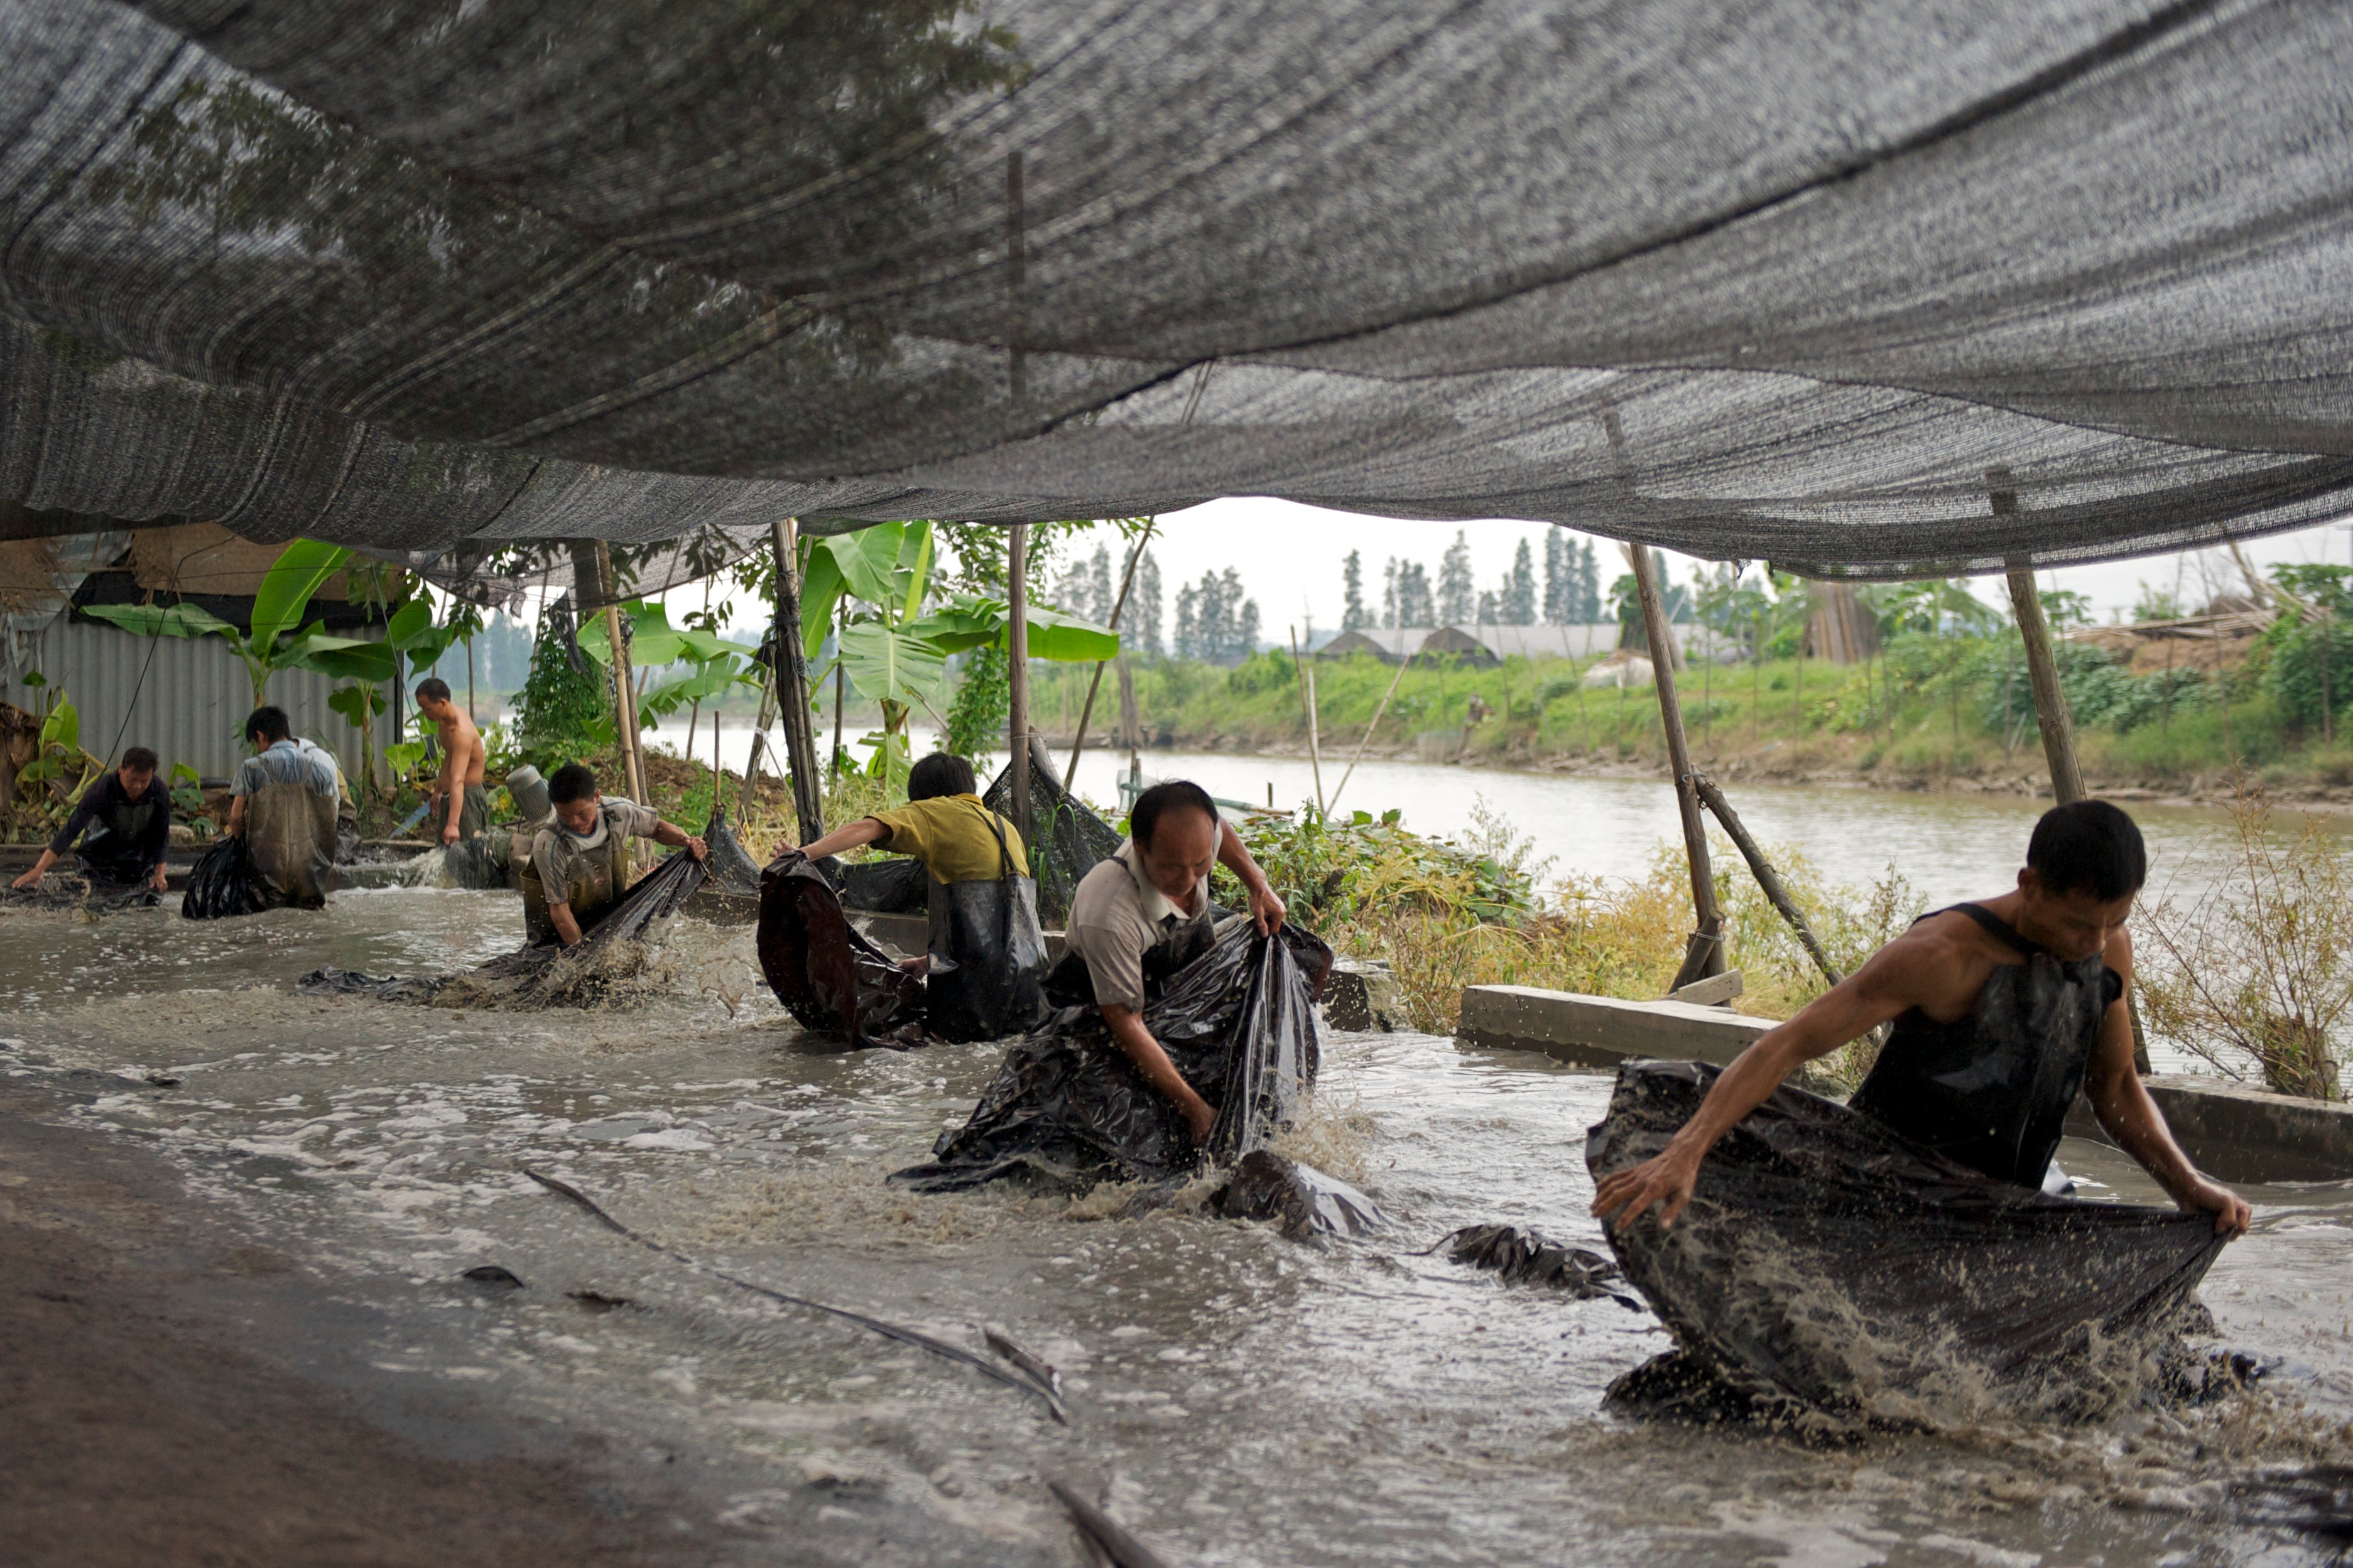 Workers removing the mud from the tea silk at the end of the dyeing process. (Dirk Vahldiek and Kathrin von Rechenberg)